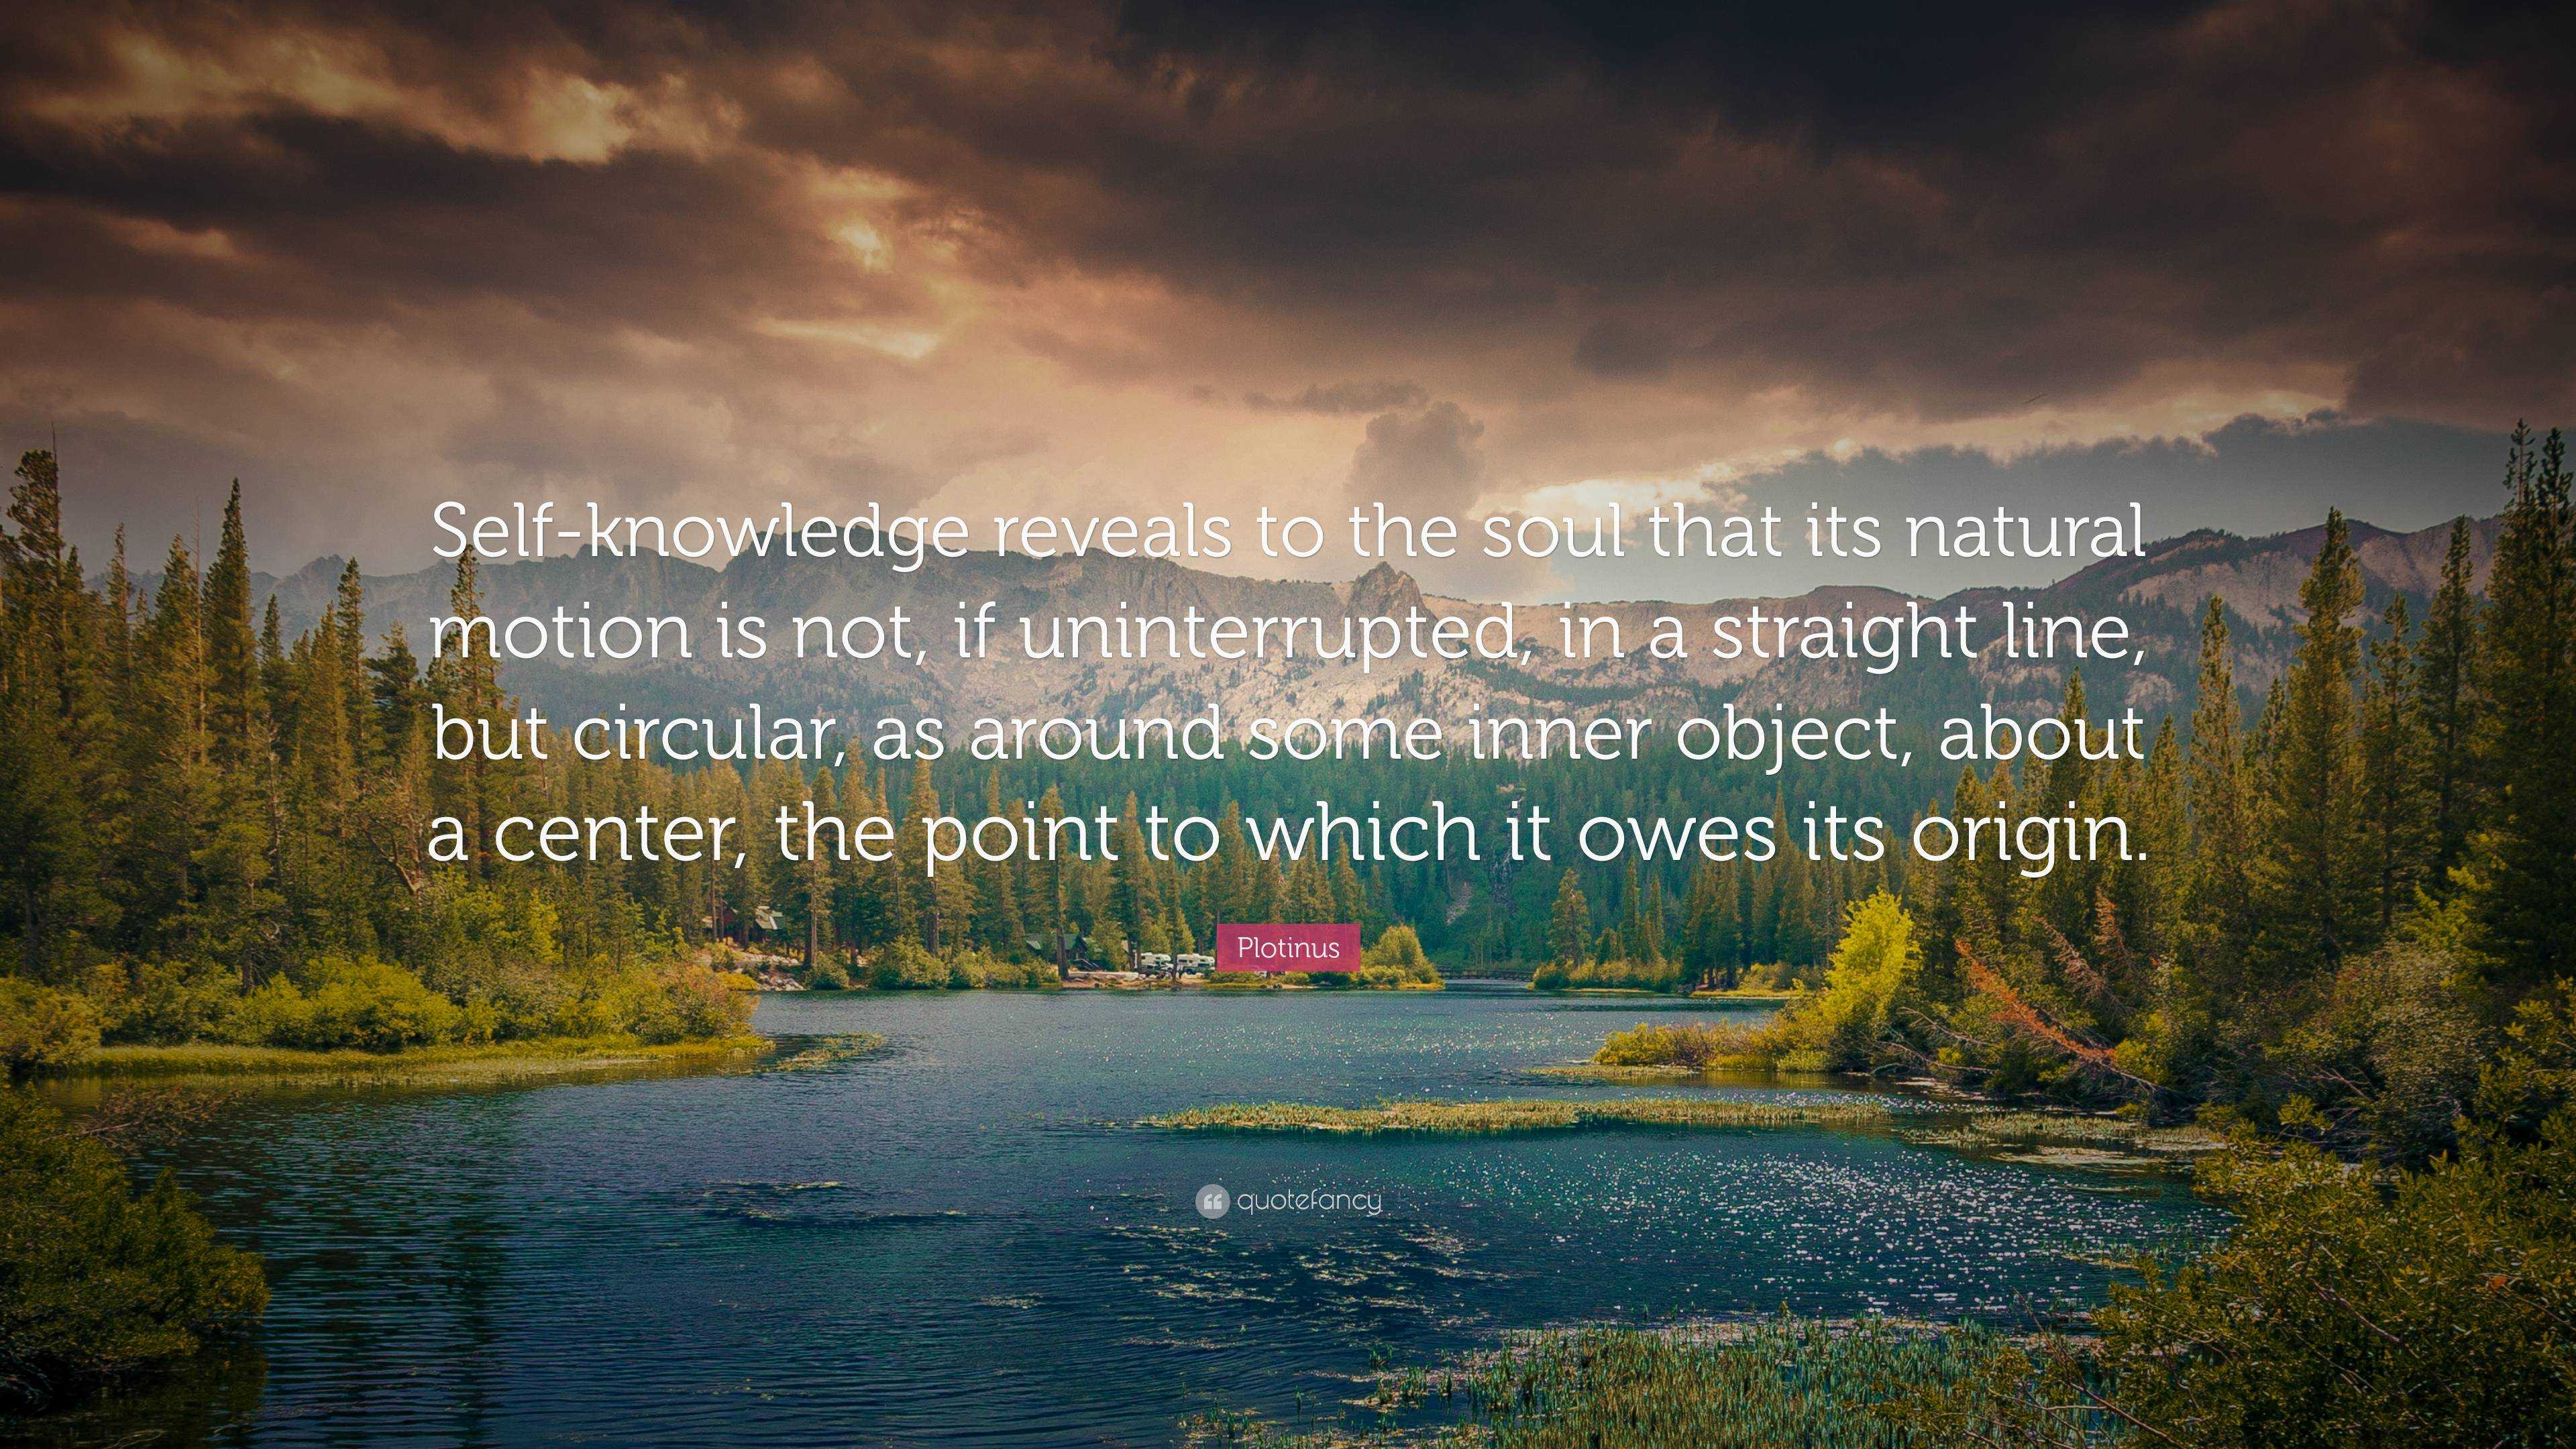 Plotinus Quote: “Self-knowledge reveals to the soul that its